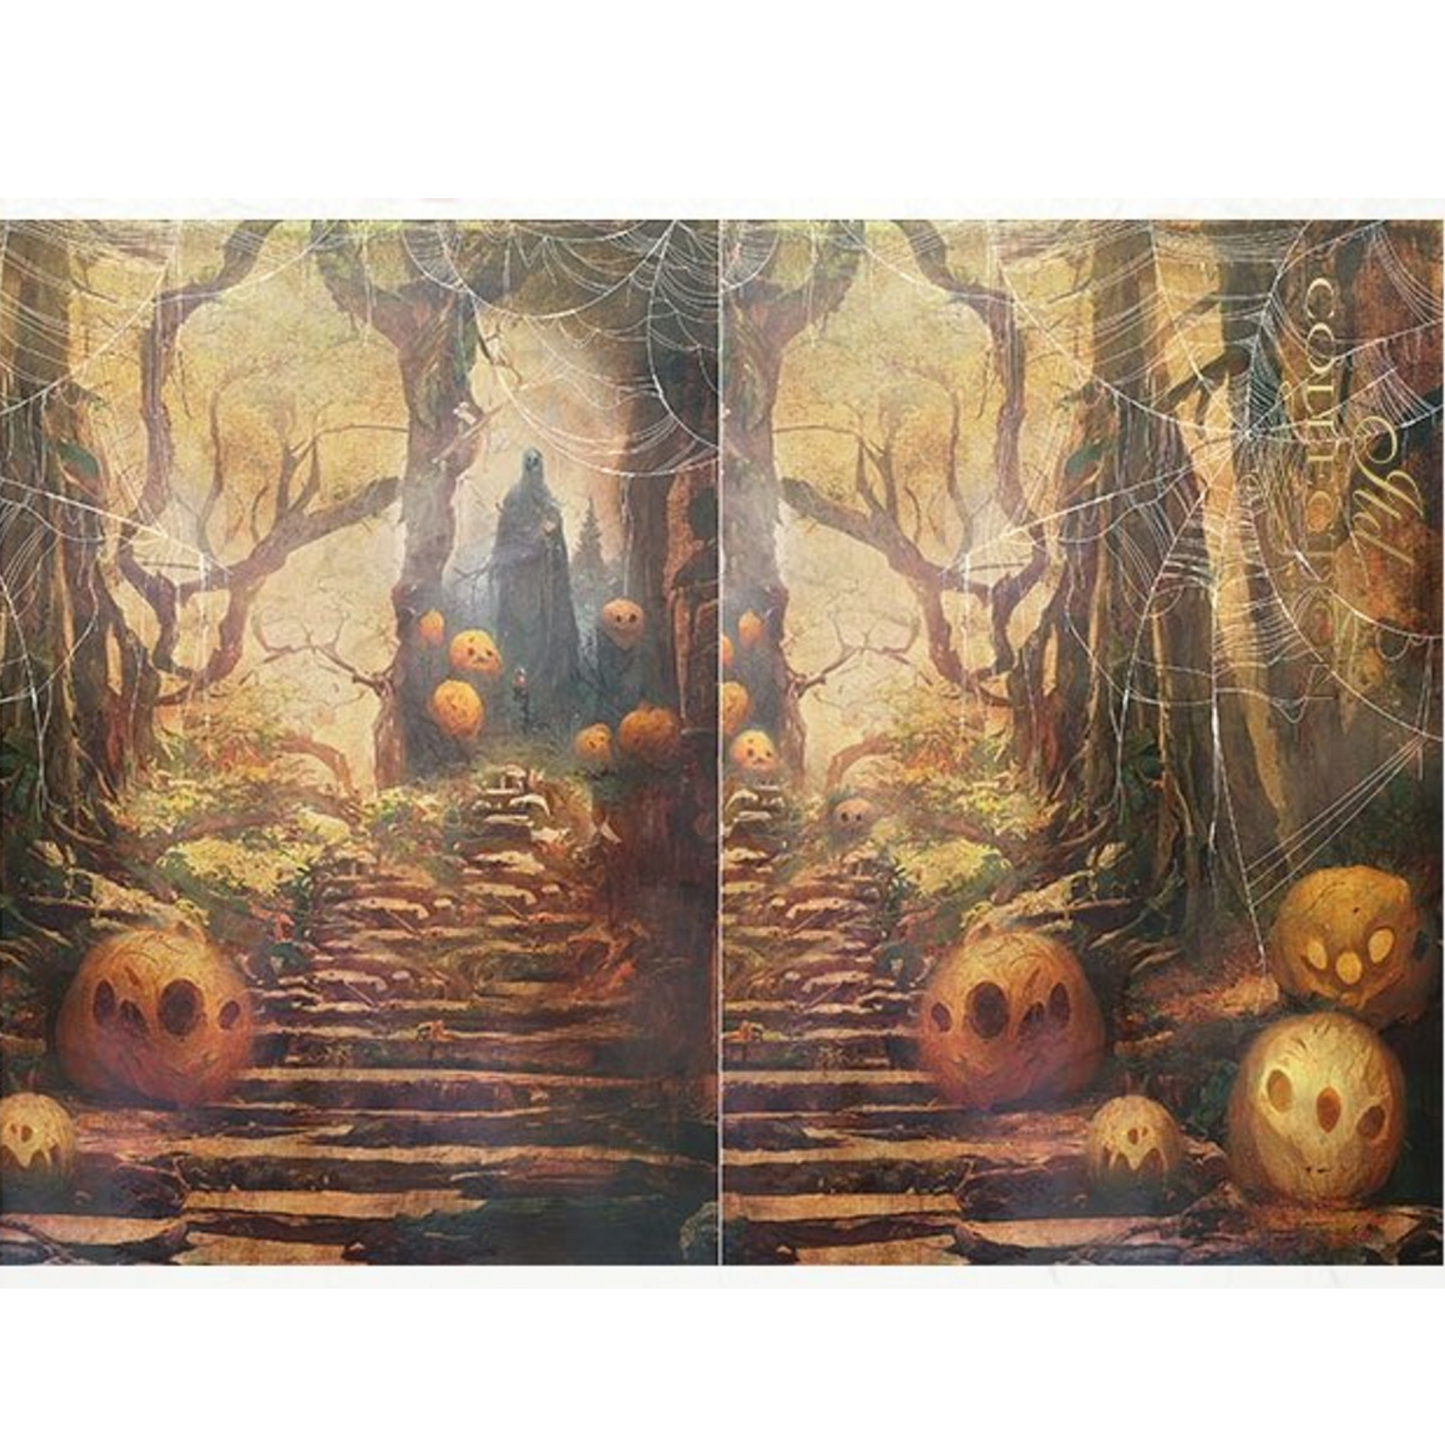 "Spooky Forest" decoupge rice paper by ITD Collection. Available at Milton's Daughter.